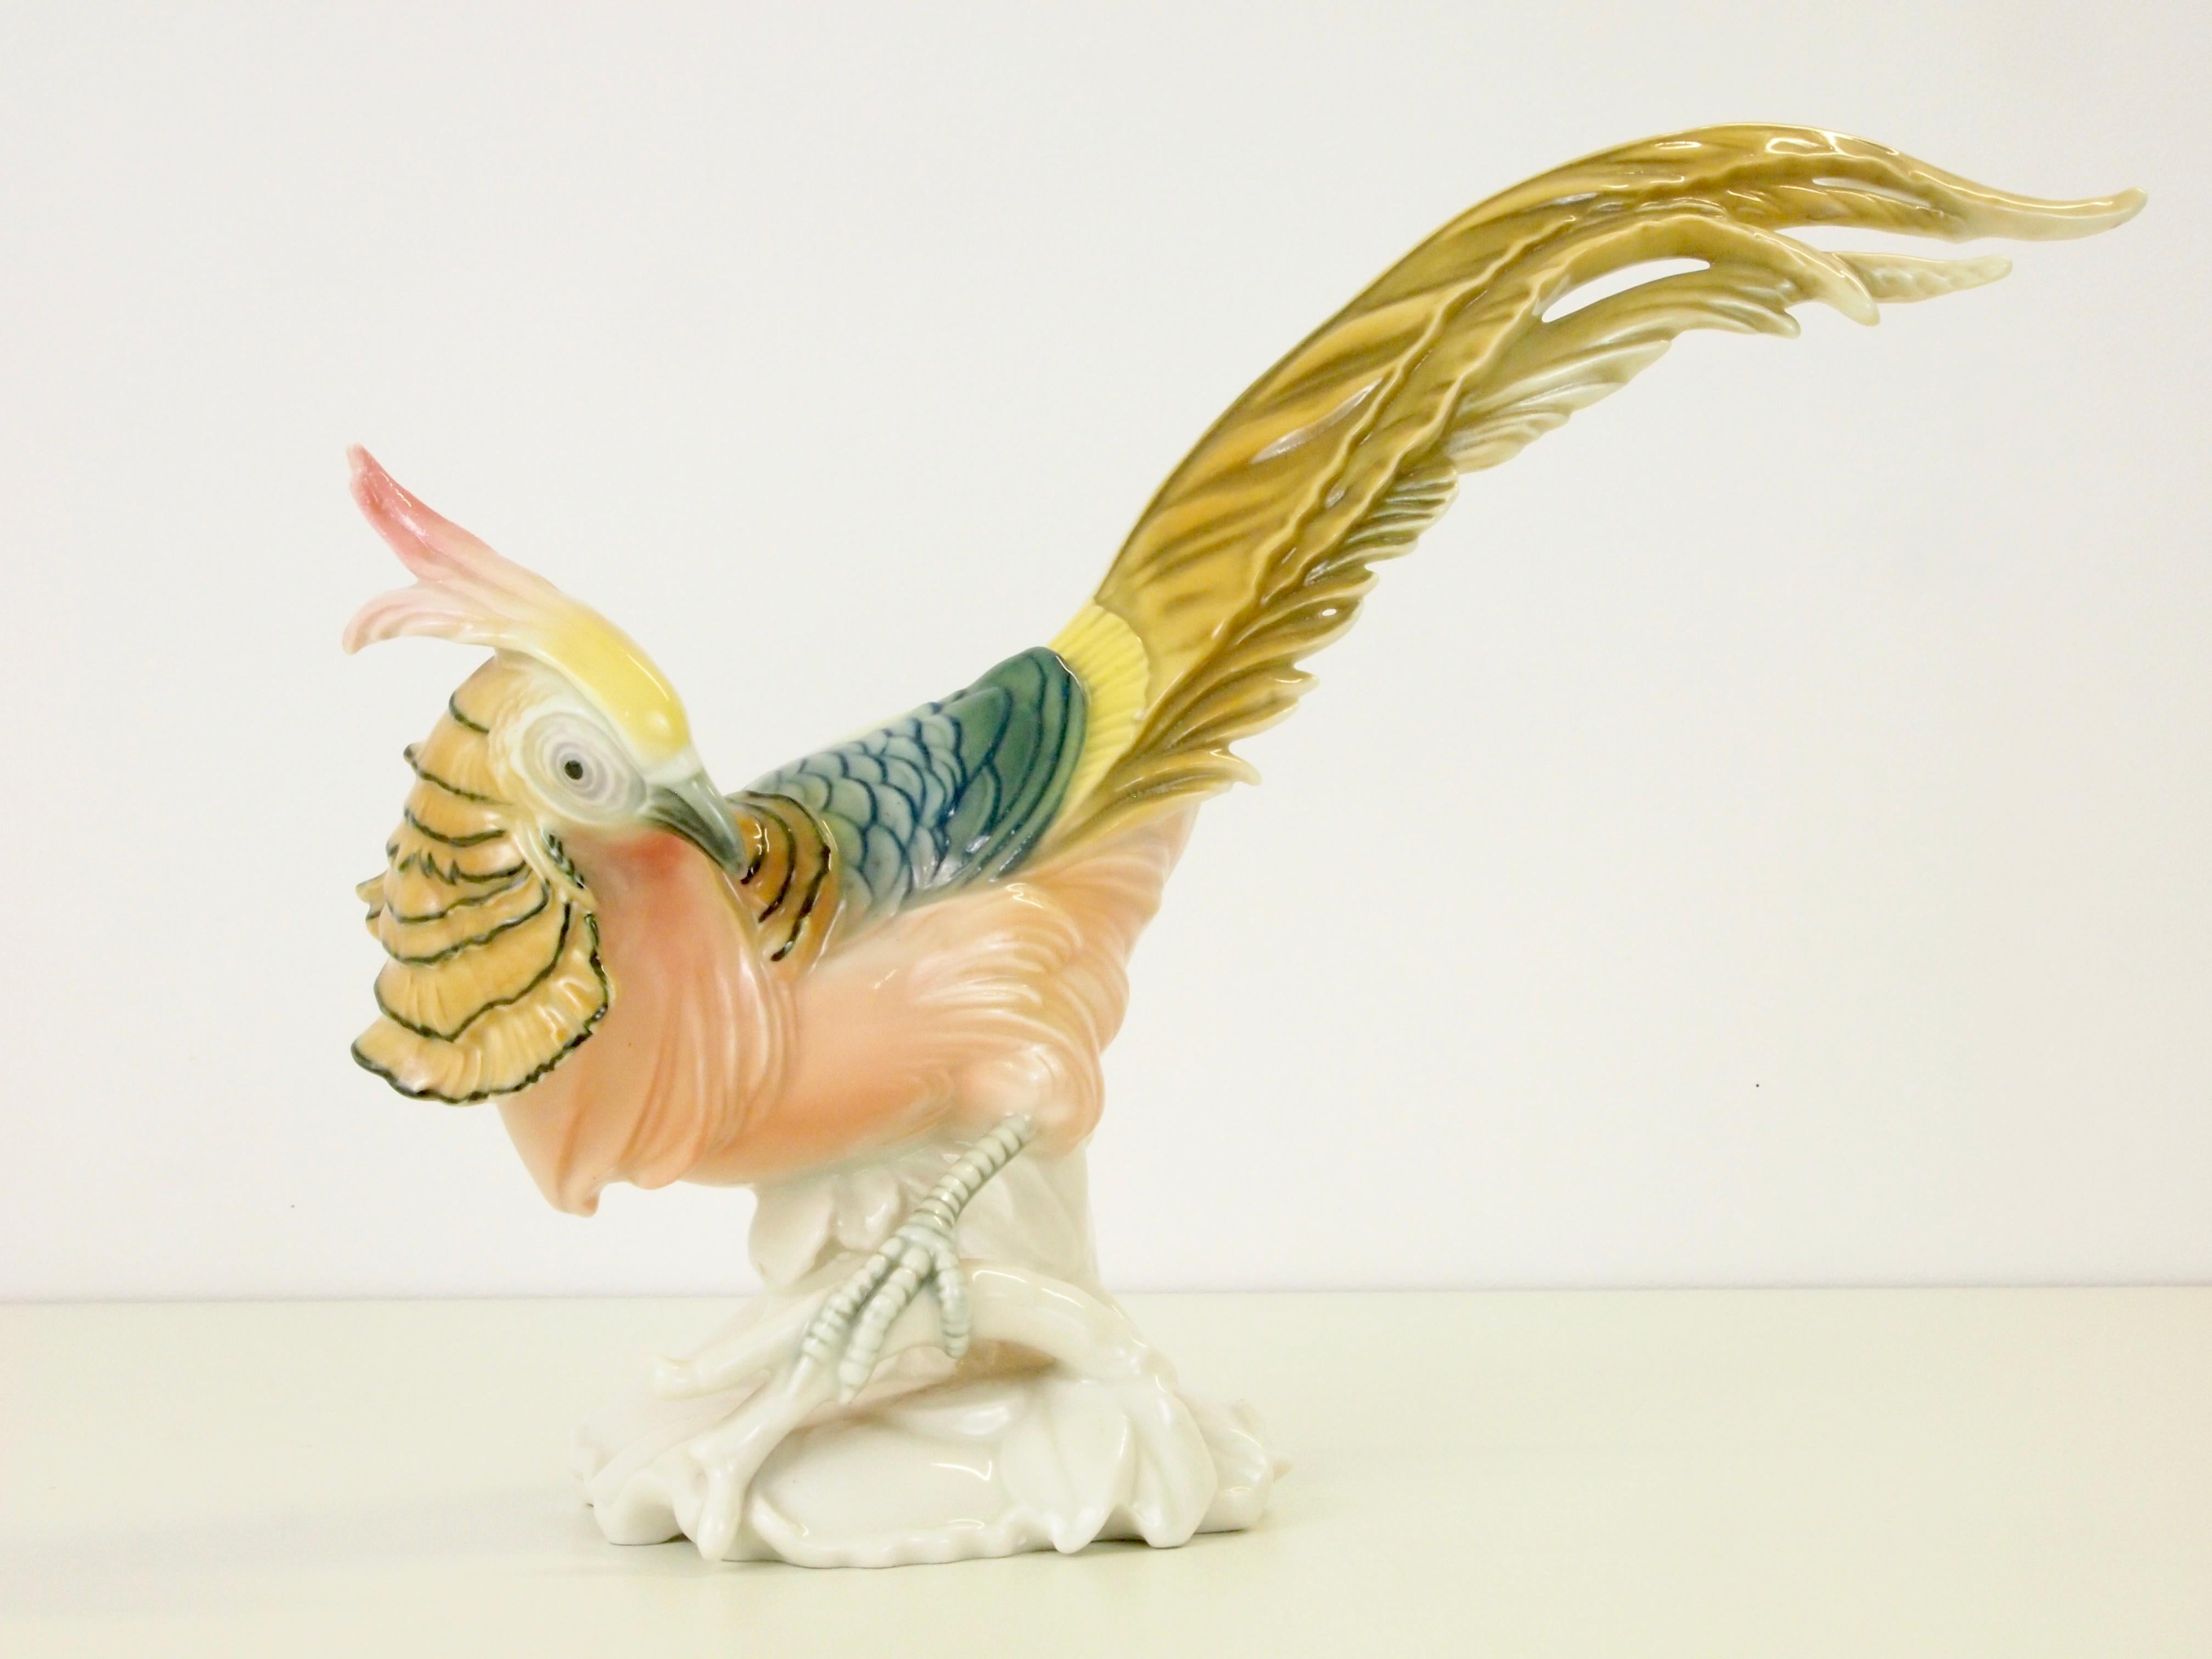 Midcentury German porcelain figurine depicting a pheasant in soft pastel colors by Karl Ens Volkstedt (Dresden)

A lovely piece of high quality porcelain. Hand painted full with fine details and beautiful colors.

Condition: In very good vintage